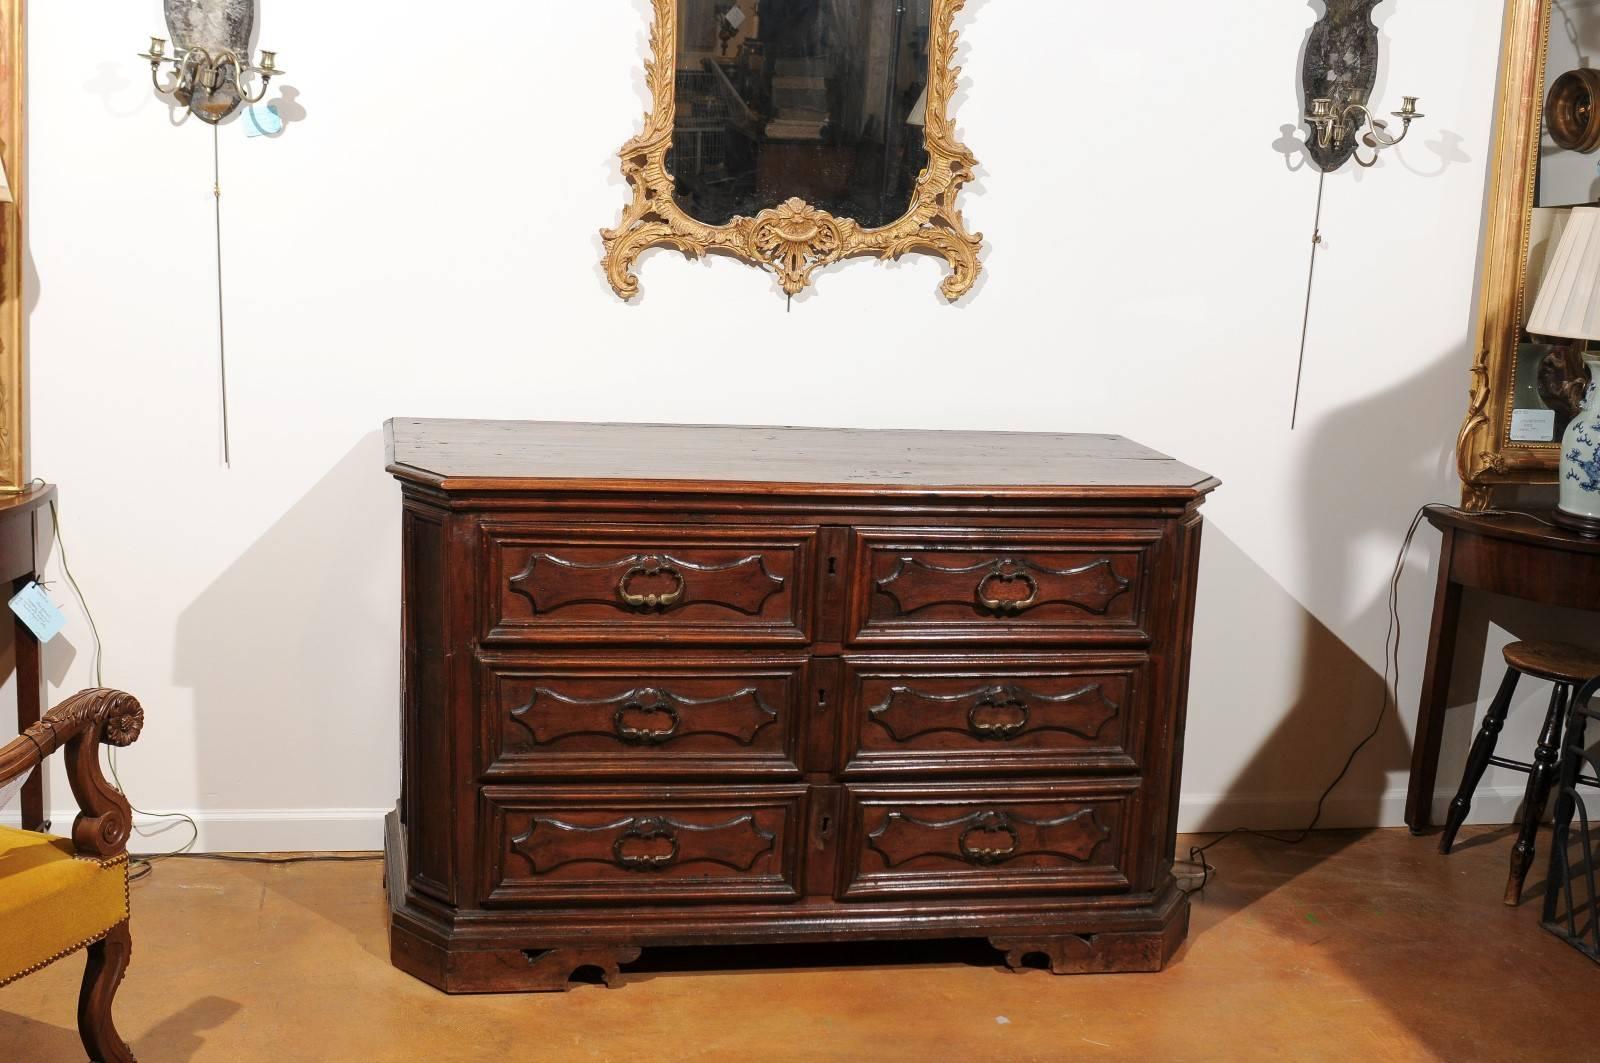 An Italian dark walnut three-drawer commode with cartouches and diamond motifs from the mid 19th century. This Italian commode features a rectangular top with beveled edges and chamfered corners in the front, sitting above three long drawers adorned